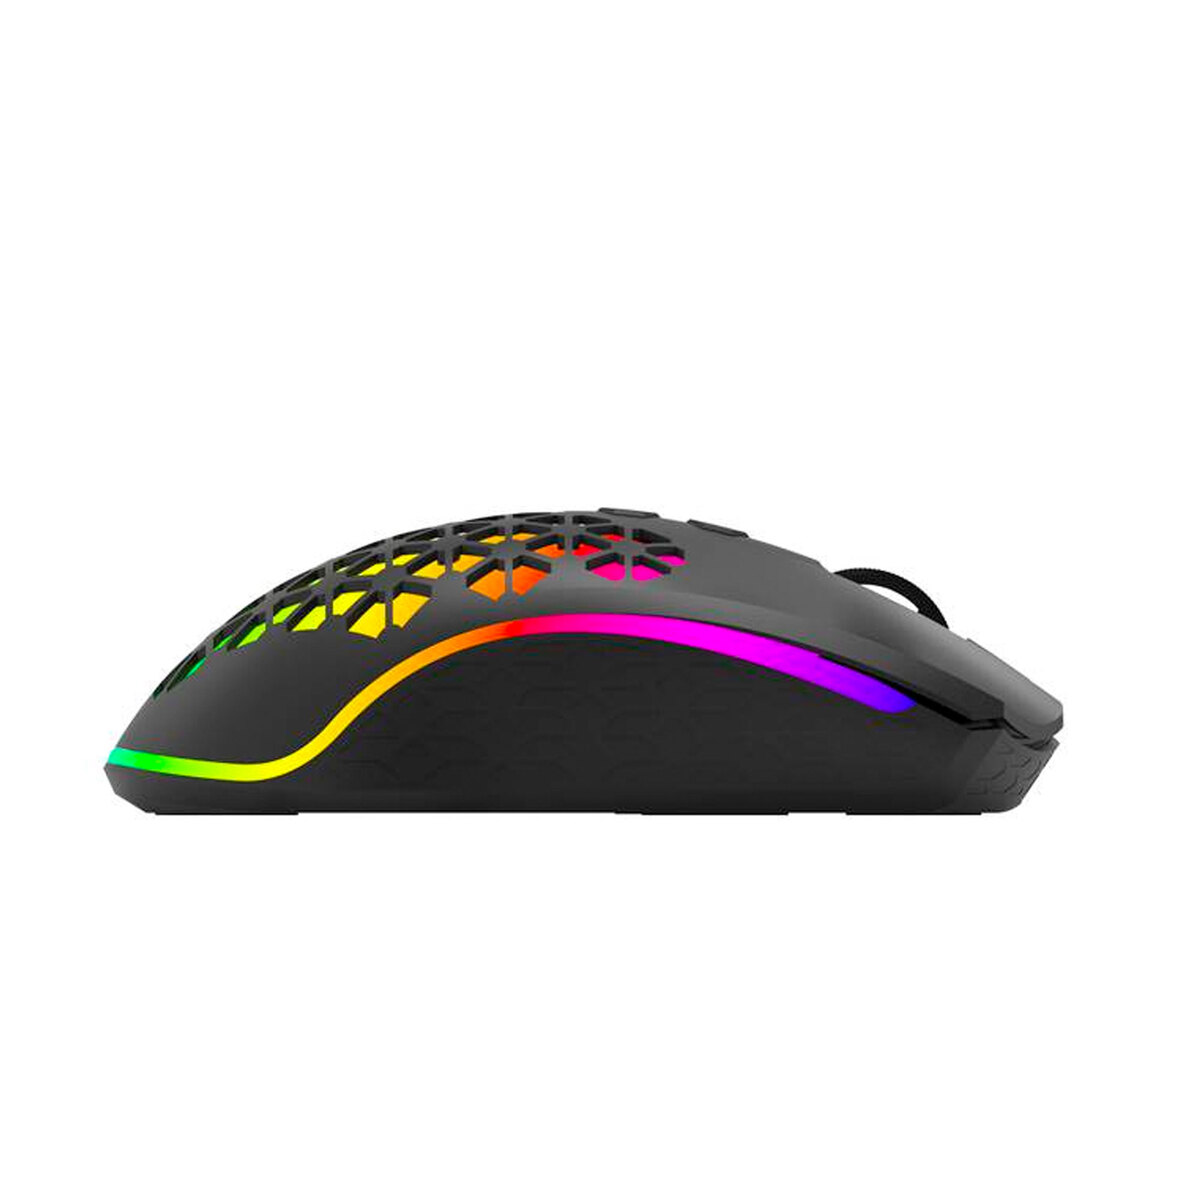 Porodo 9D Wireless RGB Gaming Mouse - Built-in Rechargeable Battery PDX312-Black